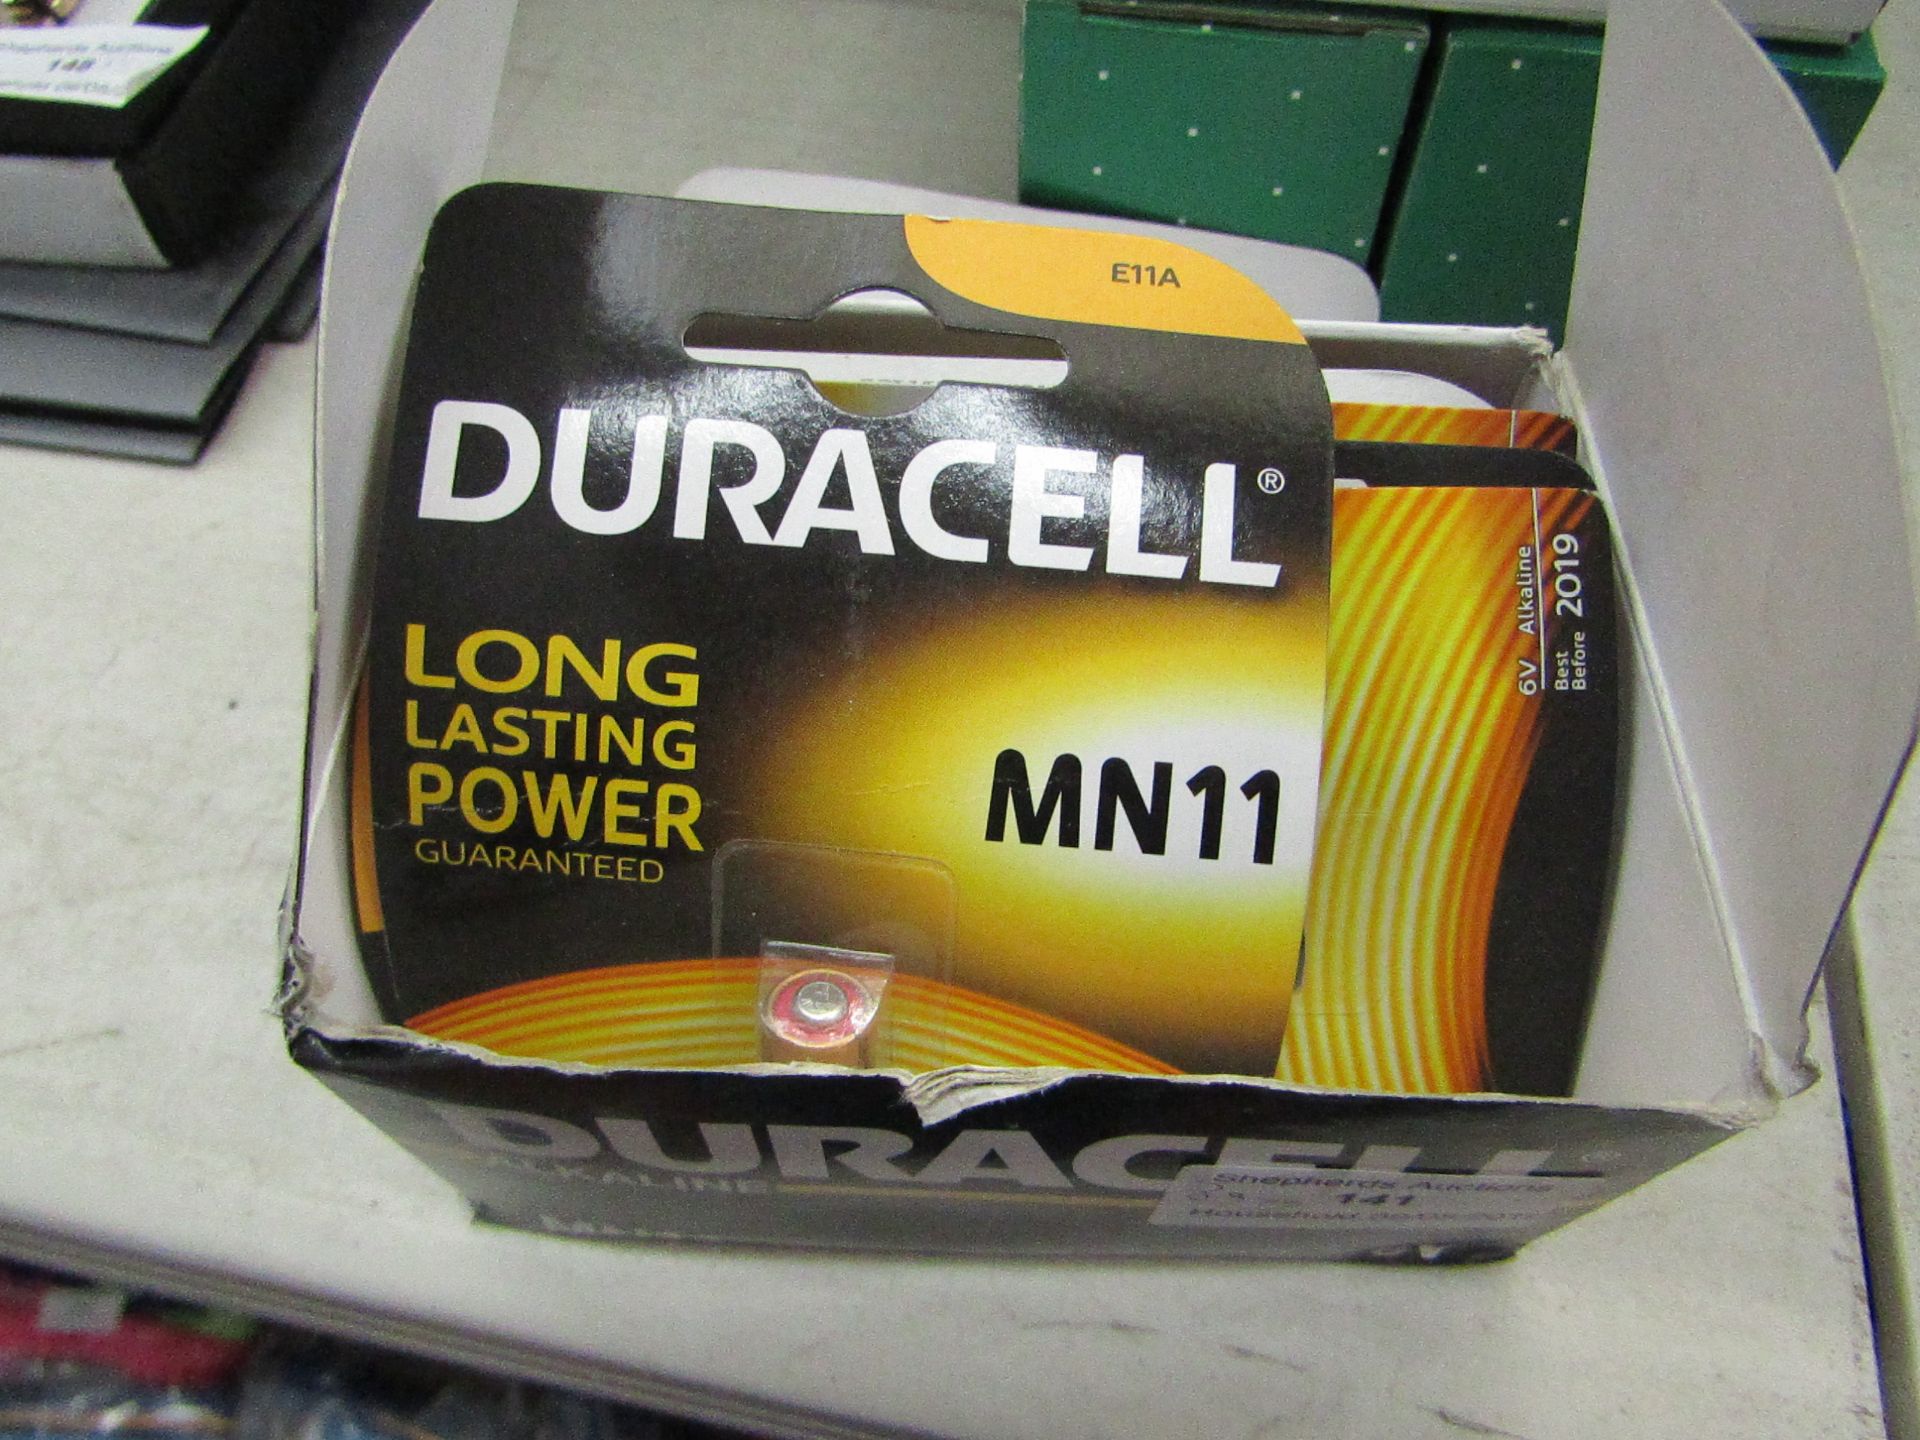 10x Duracell MN11 batteries, all new and packaged.